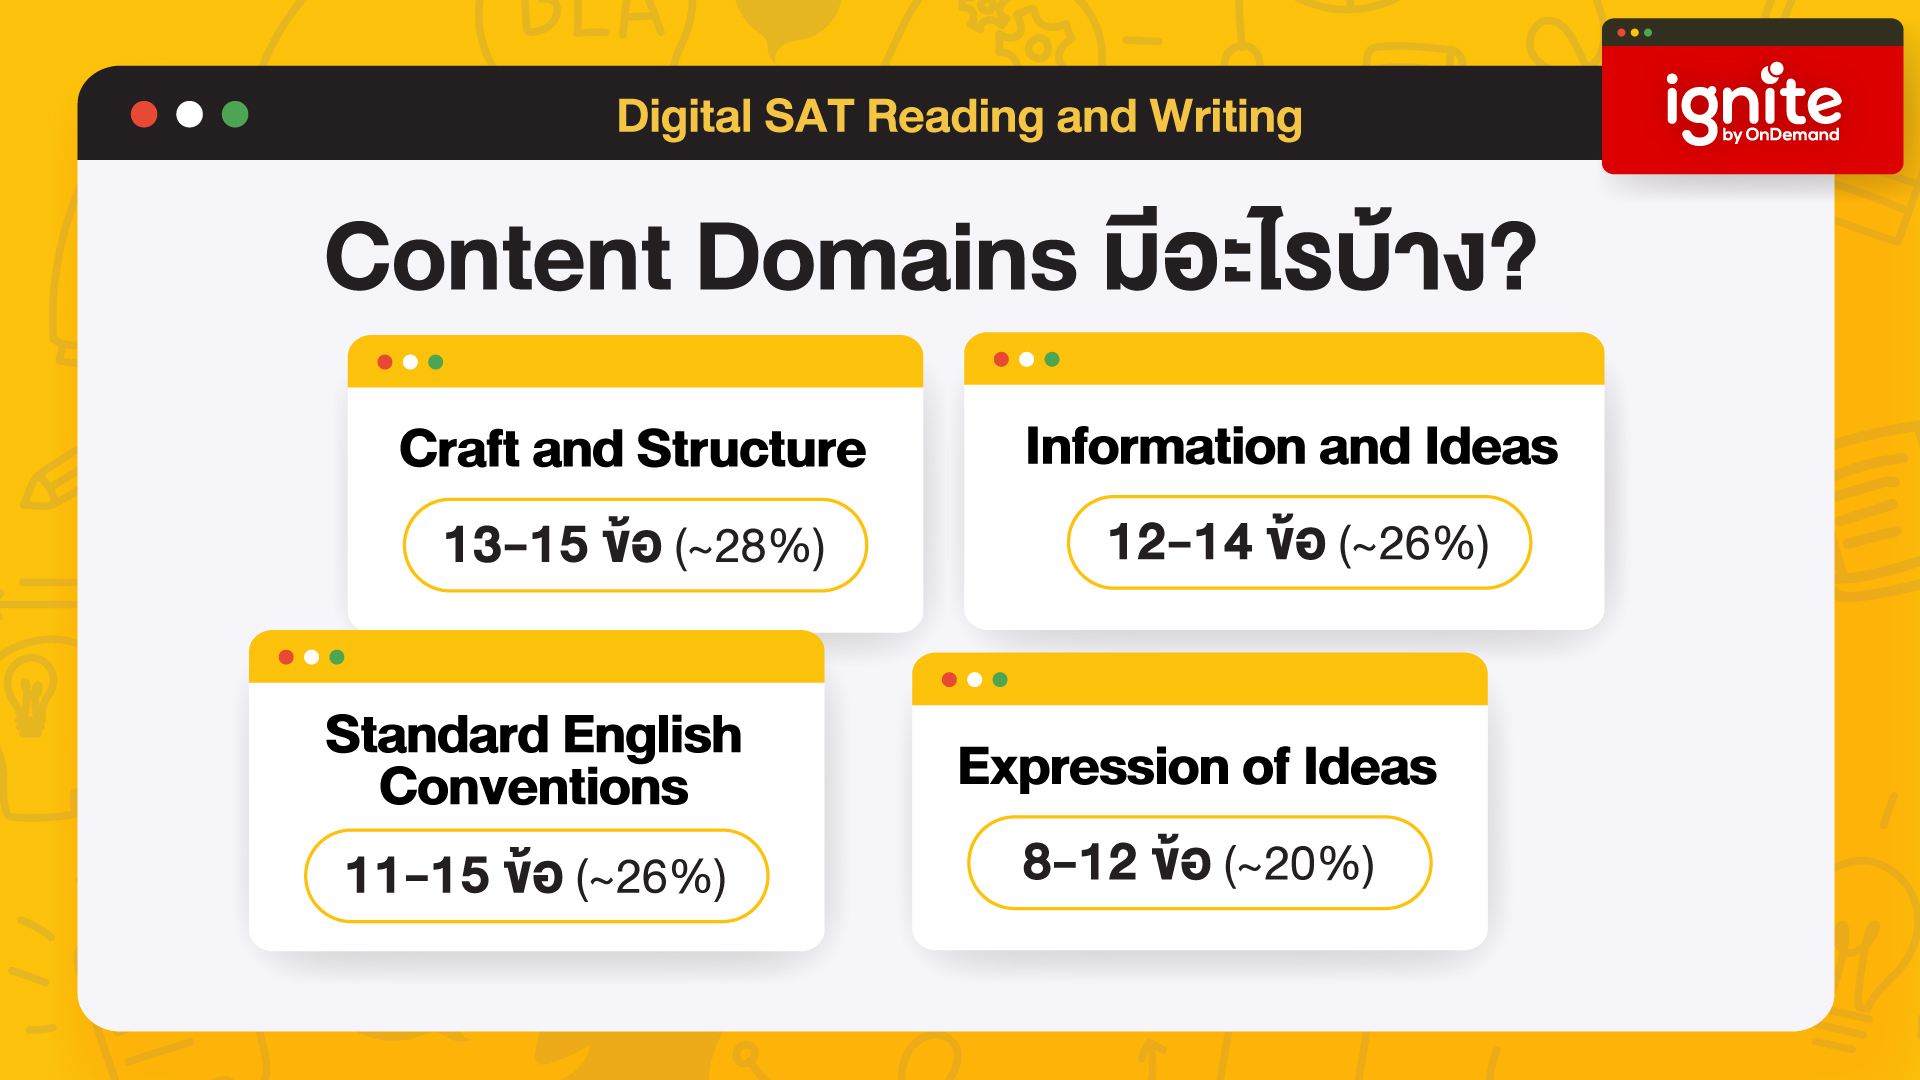 Content Domains ข้อสอบ Digital SAT Reading and Wrting 2023 - ignite by OnDemand